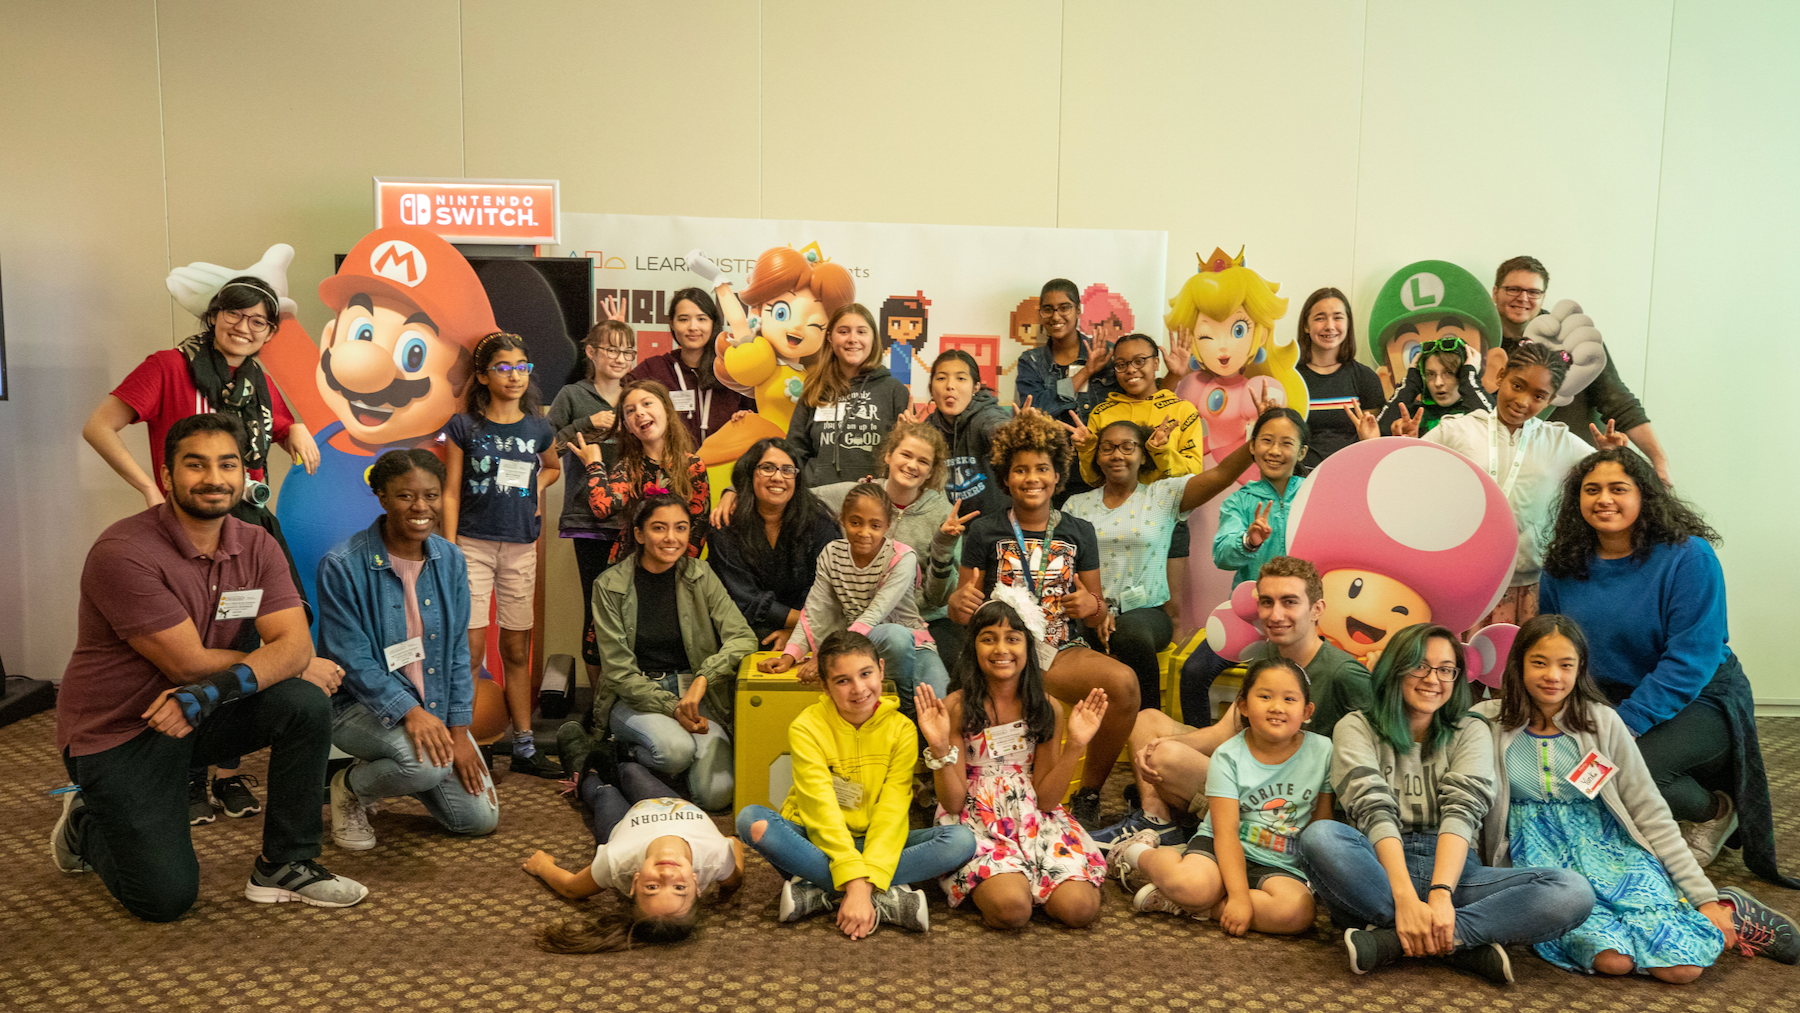 GMG Fellows &amp; campers at Nintendo of America headquarters (Copy)